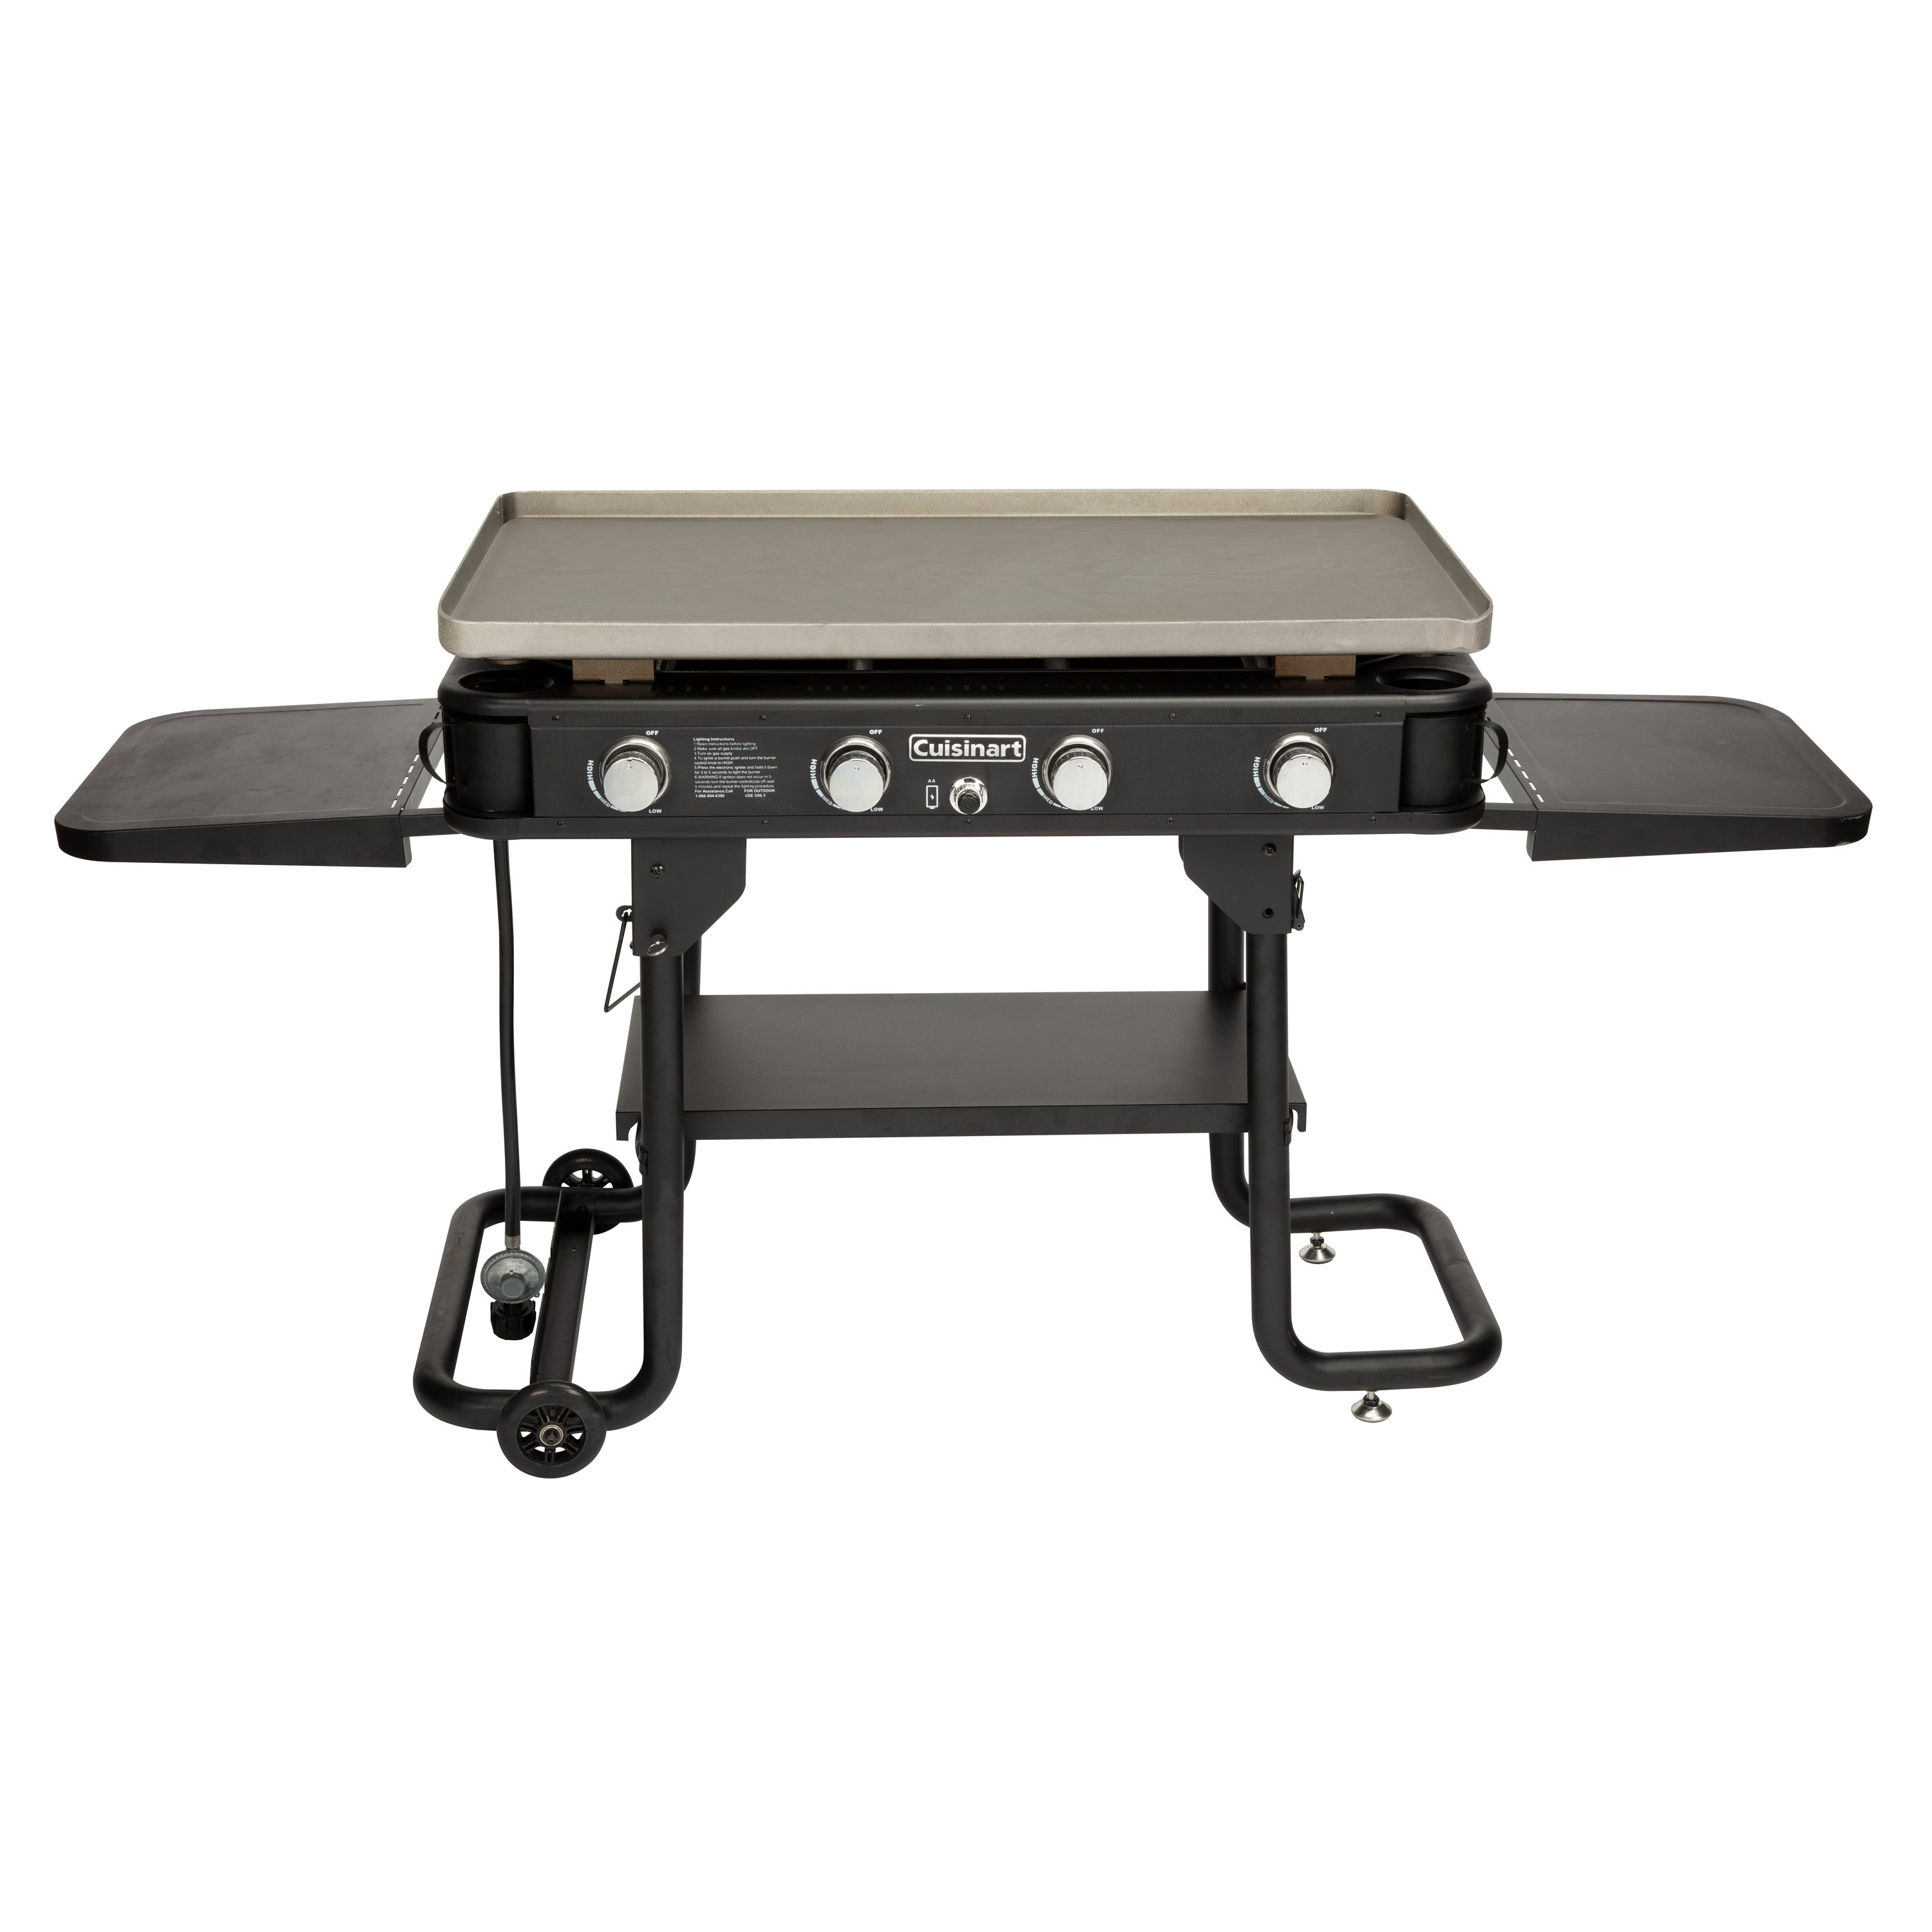 Selecting a Cooktop Griddle for Your Chicago Home